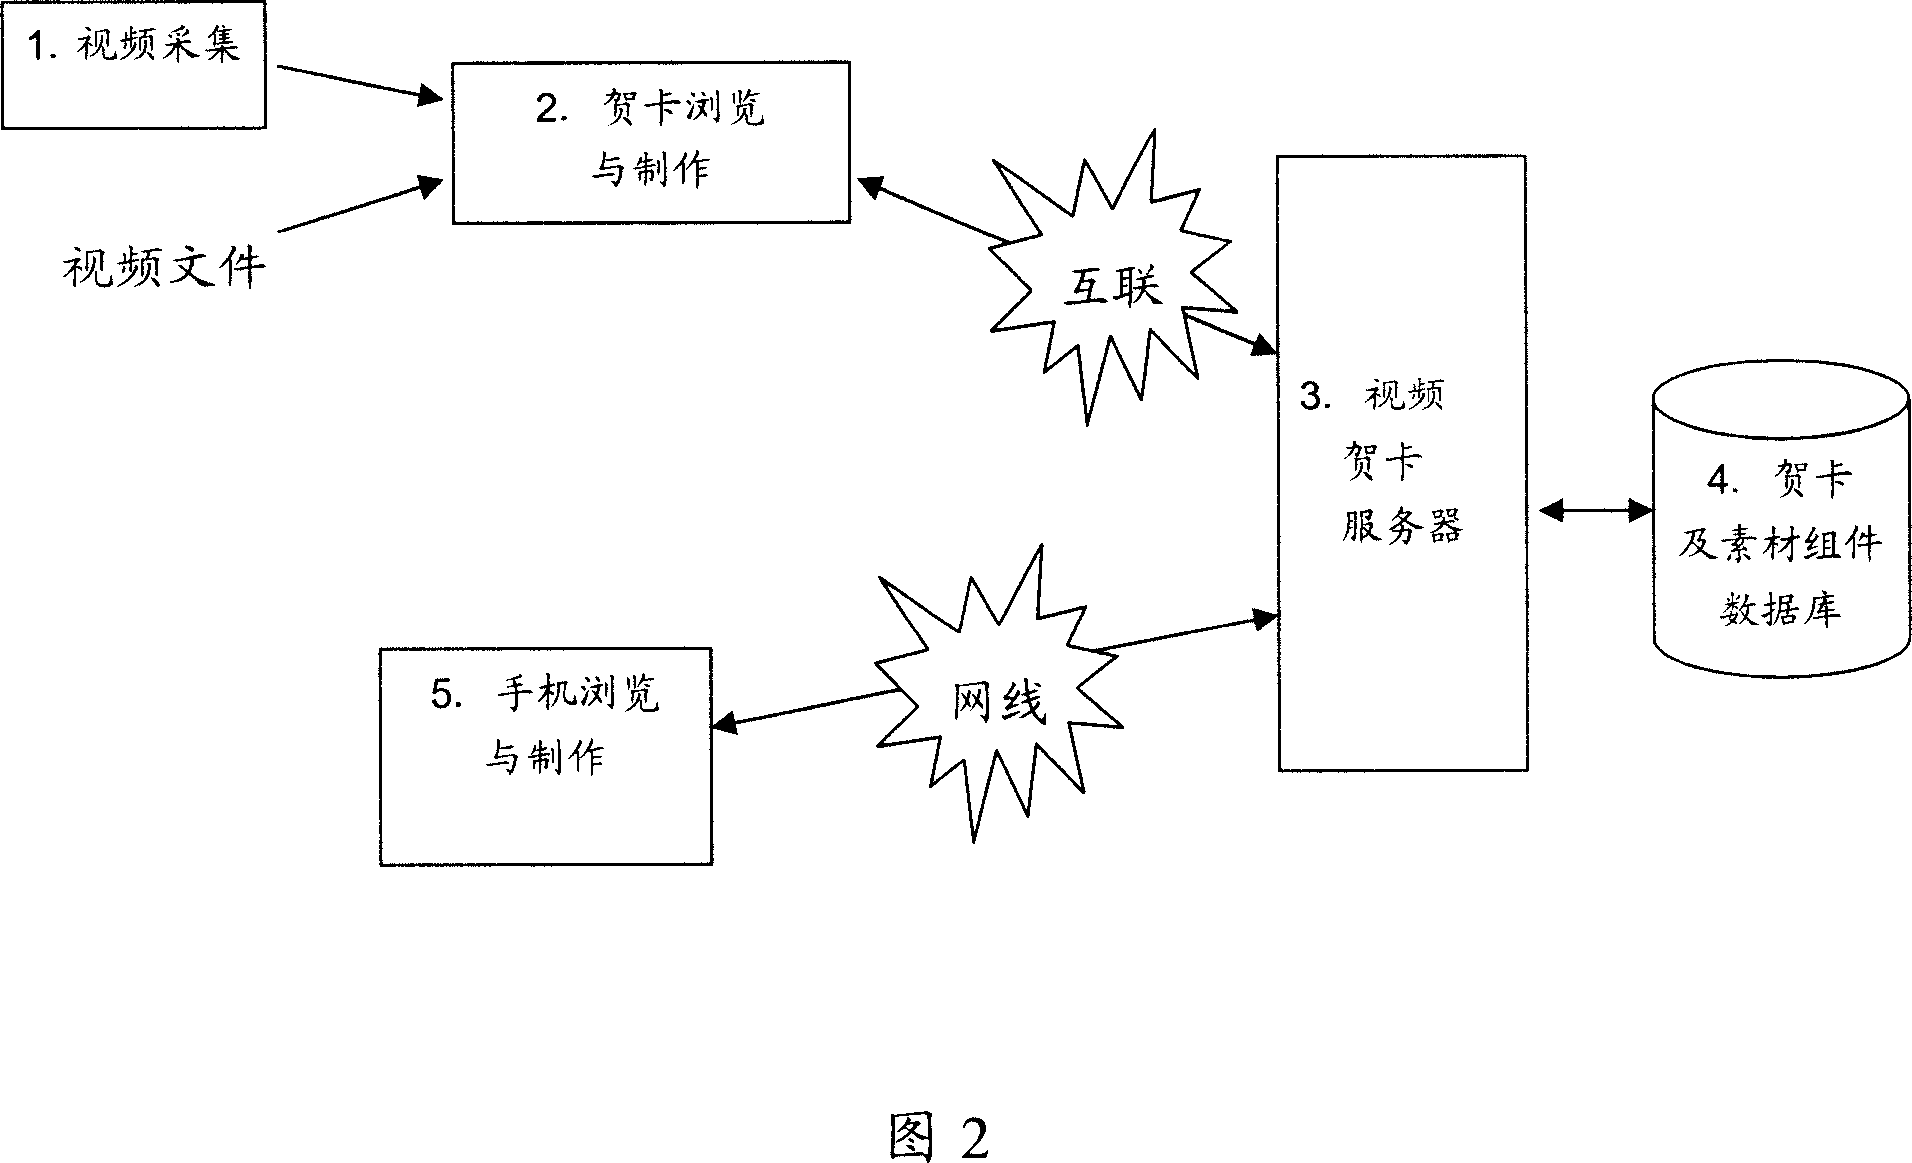 Method and device for self making and sharing video frequency greeting card